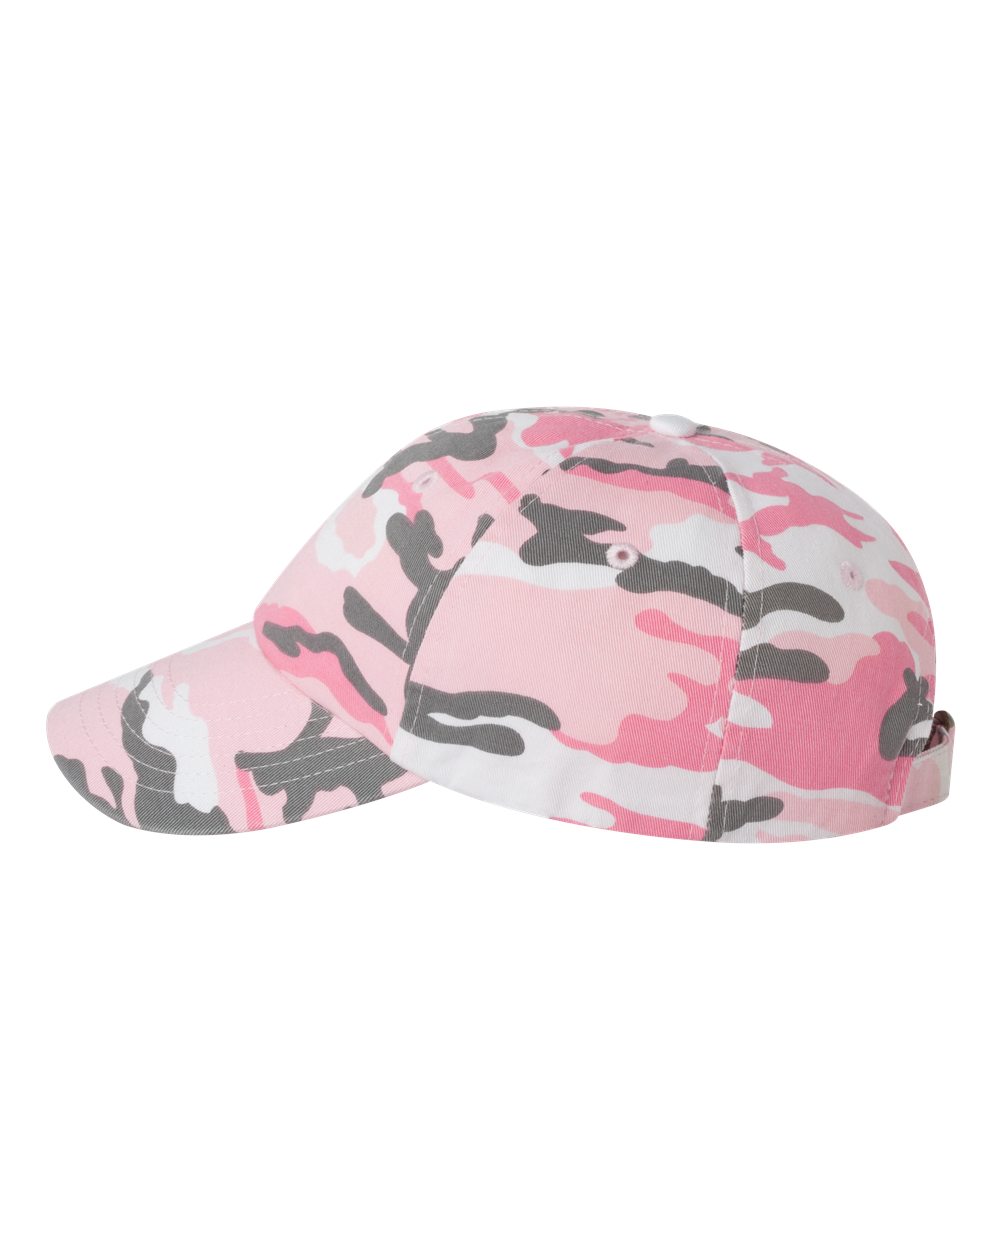 click to view Pink/Camo